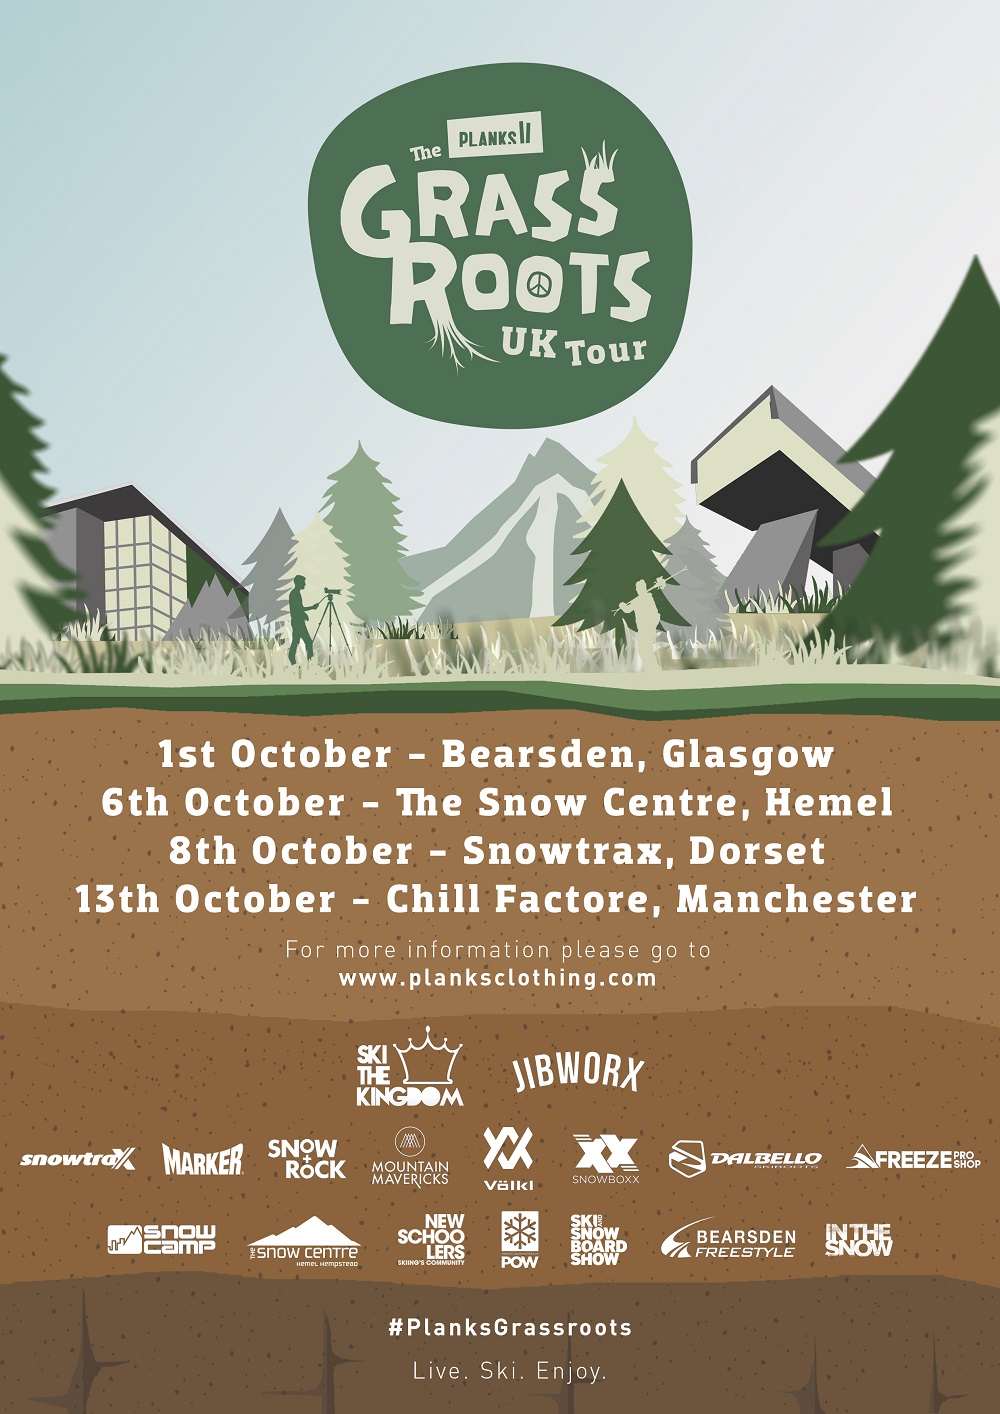 The Planks Grassroots Video Contest &#038; UK Tour